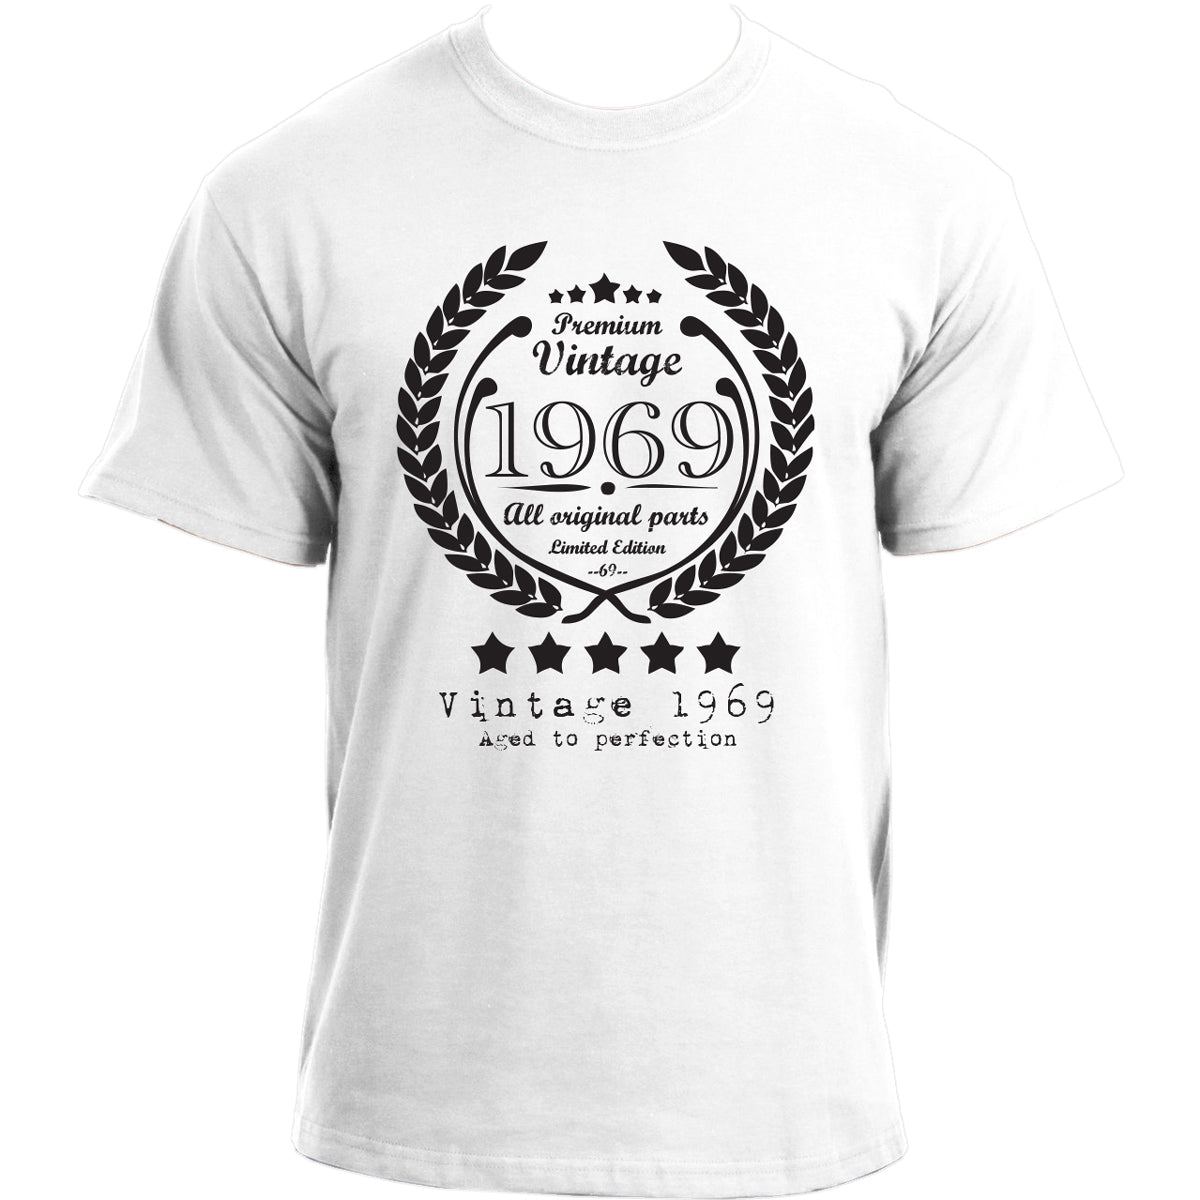 Premium Vintage 1969 Aged to Perfection Limited Edition Birthday Present Mens t-shirt